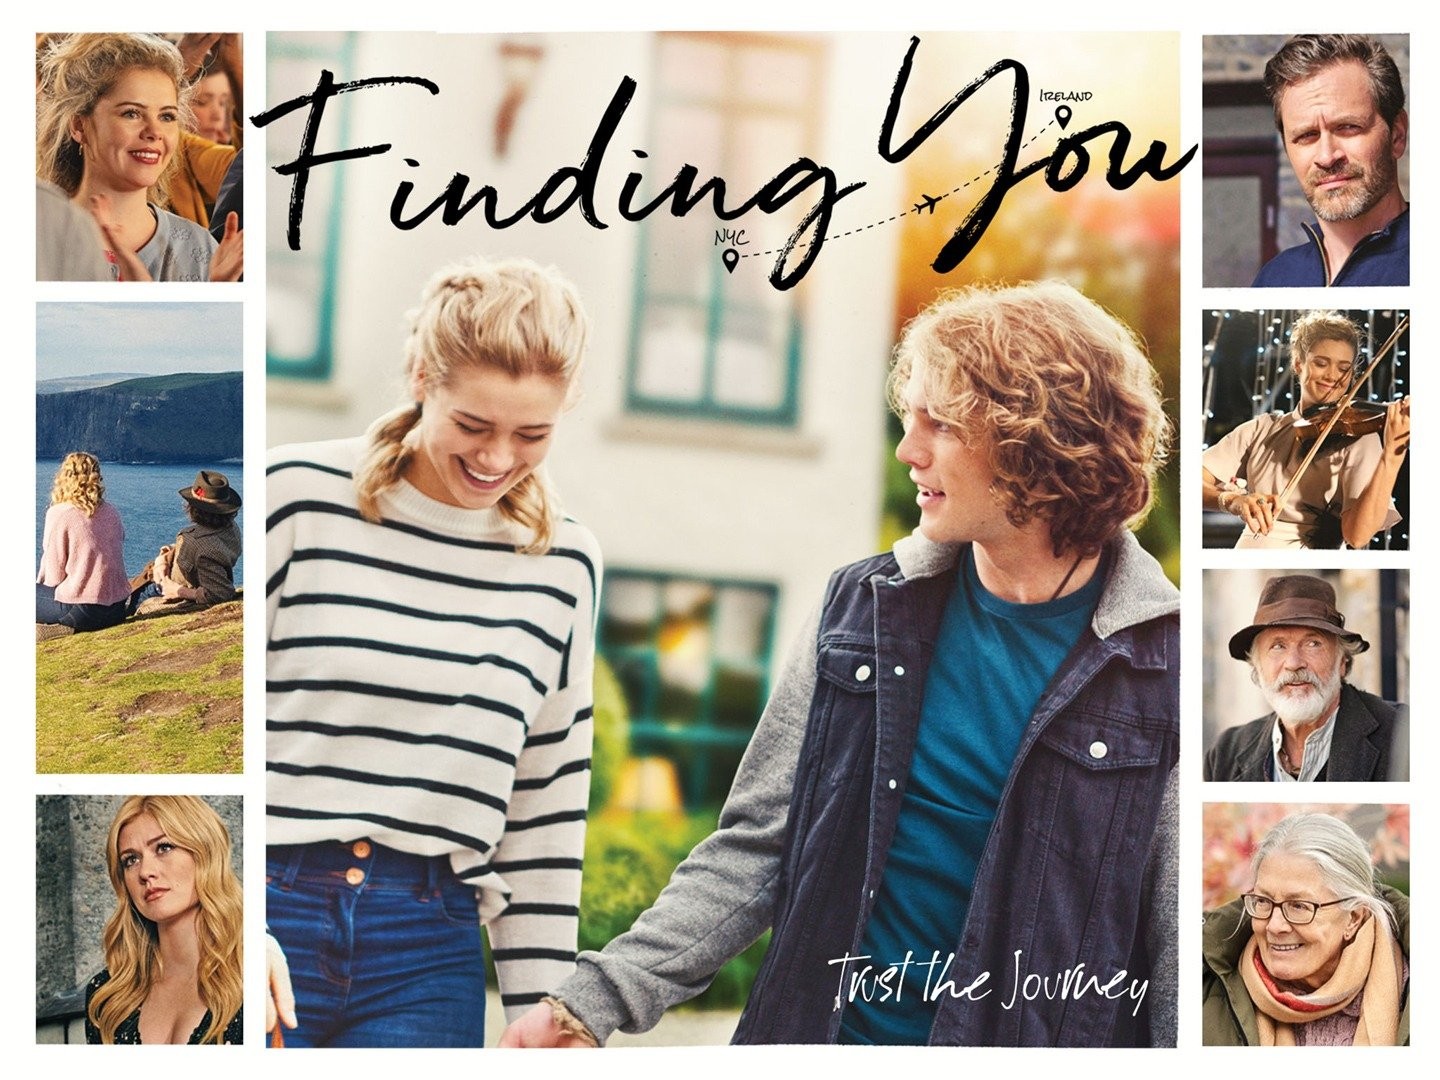 FINDING YOU